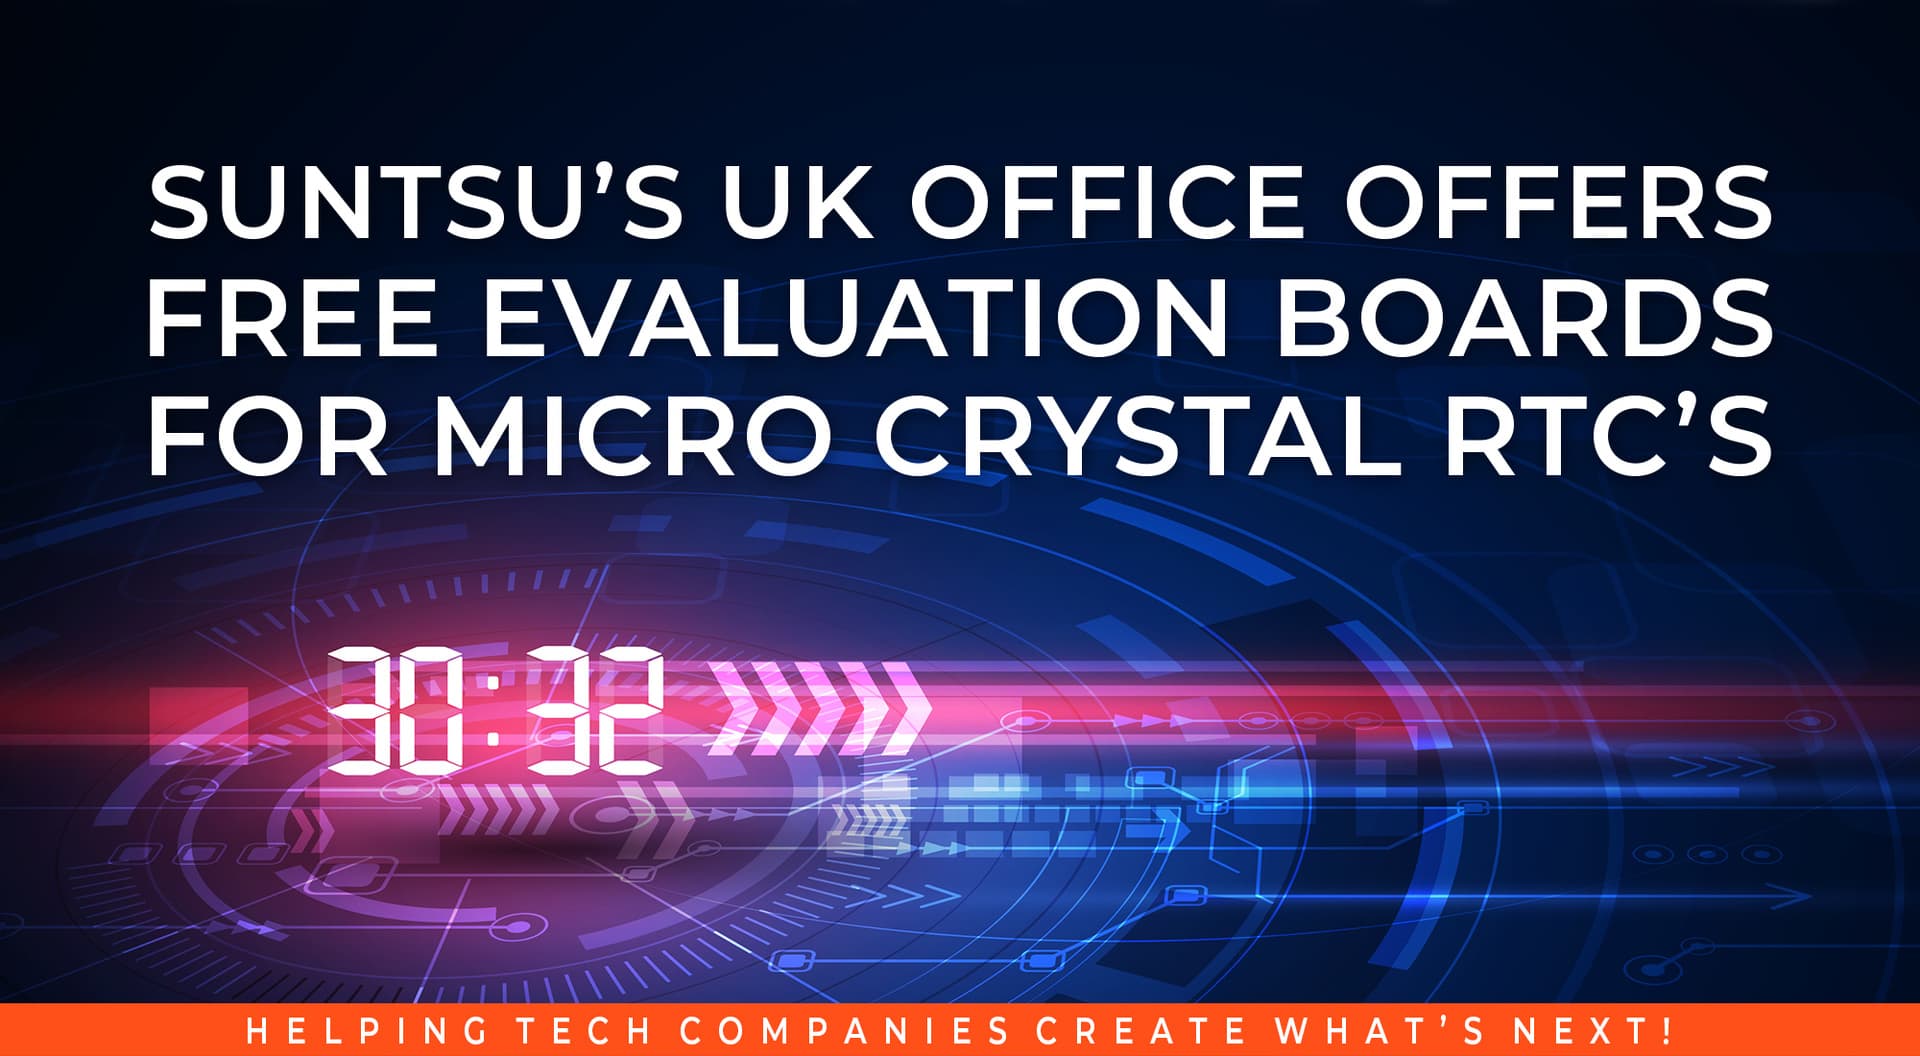 Suntsu's UK office offers free eval boards for MicroCrystal RTCs